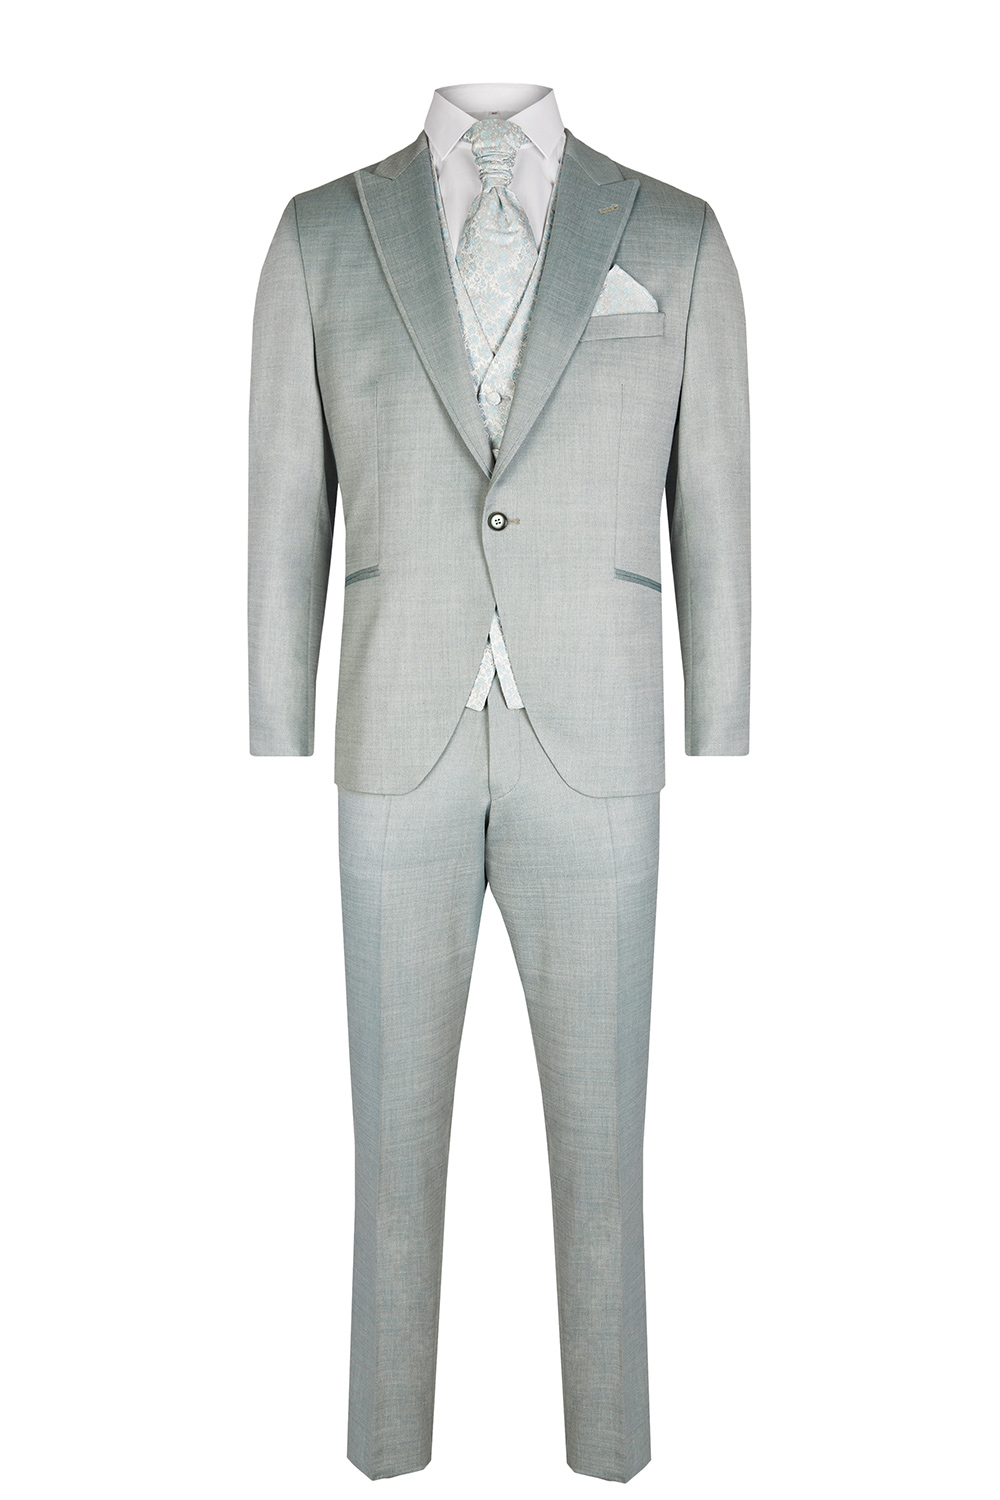 Sage Green 3 piece Wedding Suit - Tom Murphy's Formal and Menswear